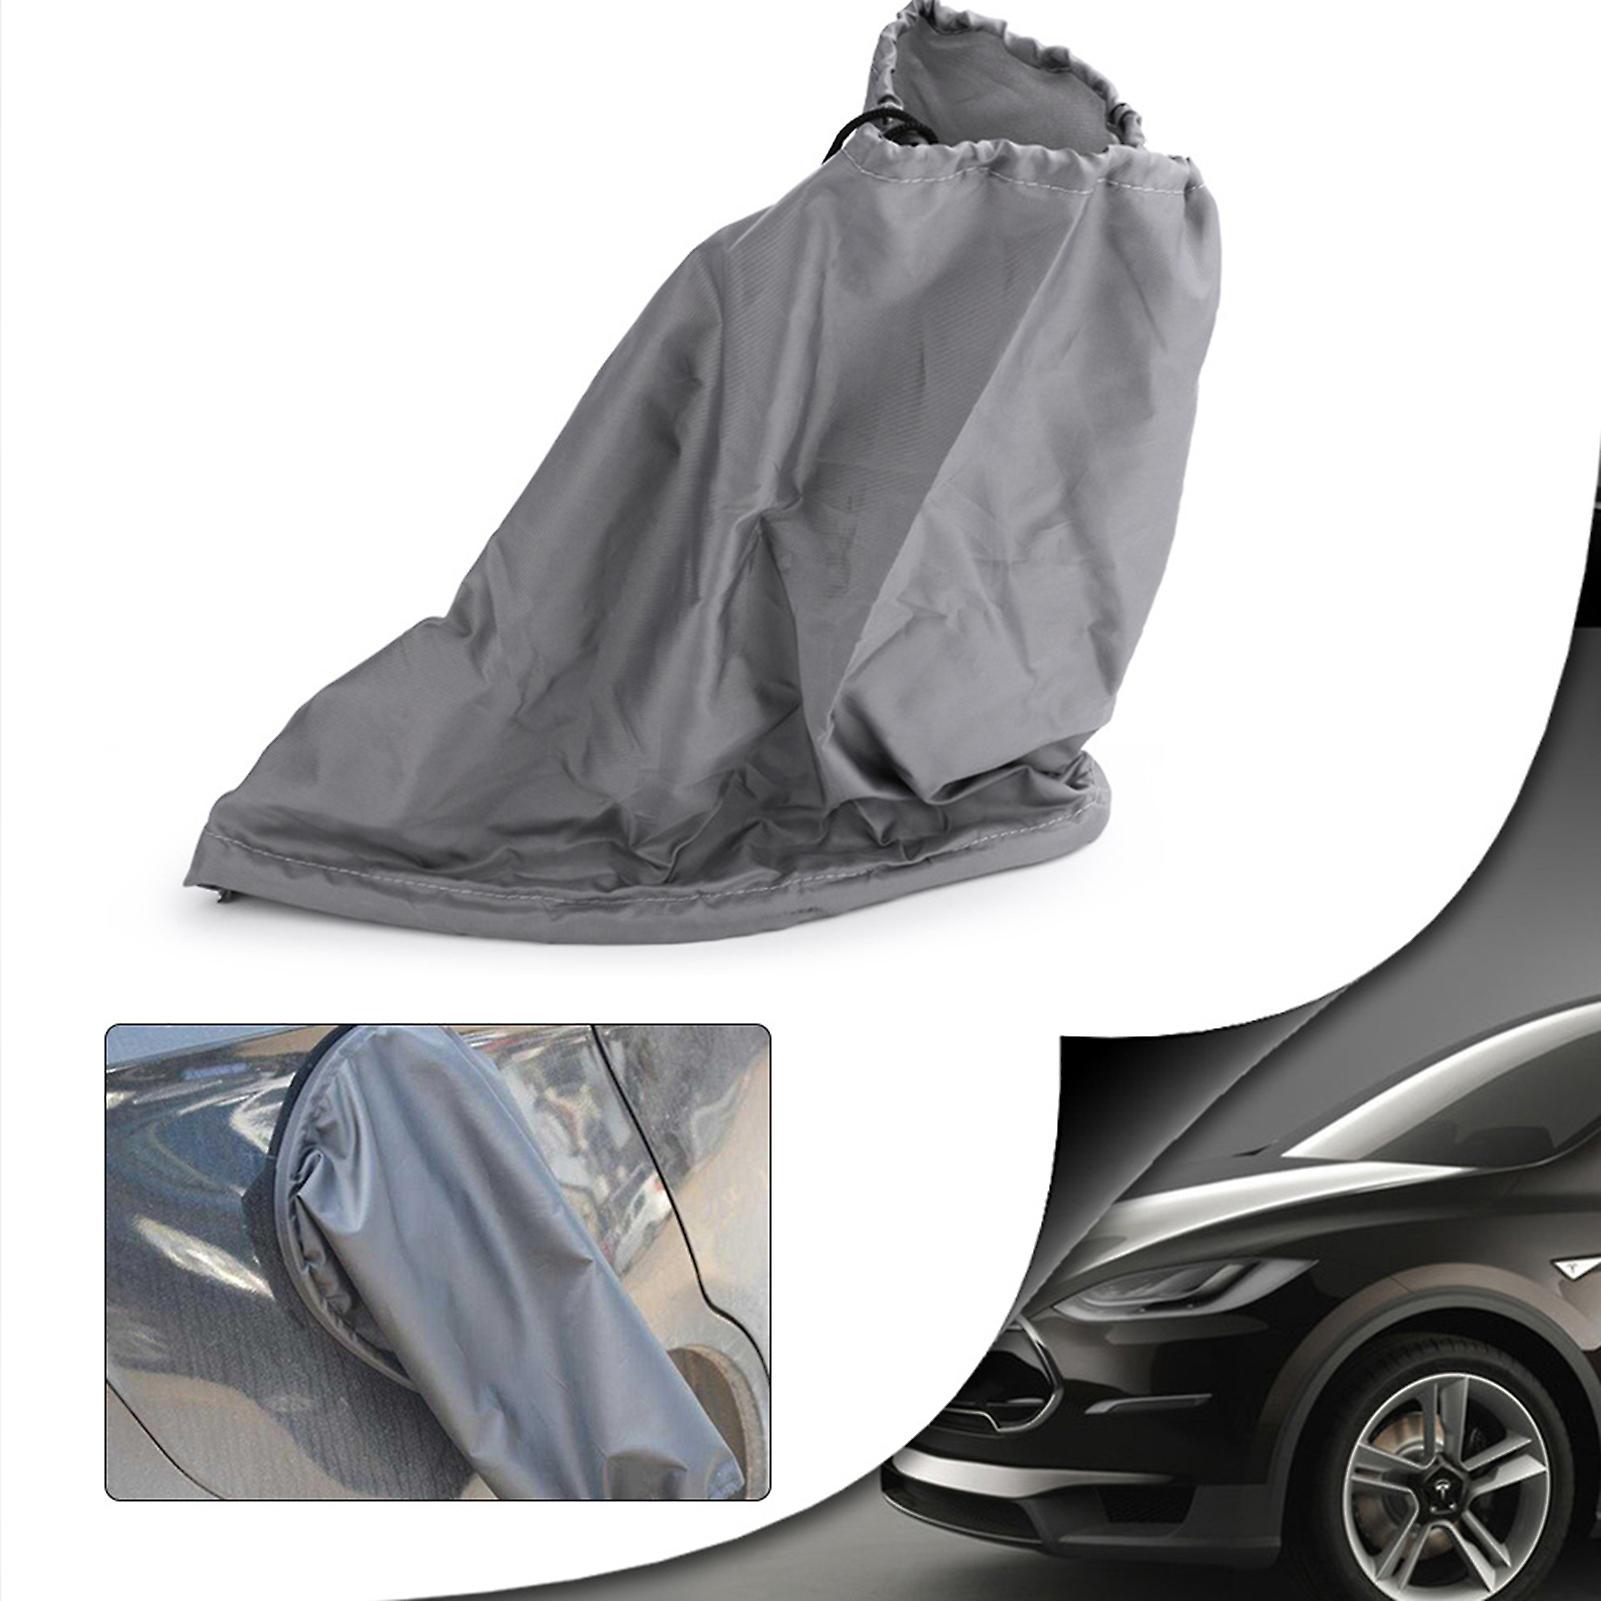 Magnet Waterproof Cover Fit For Ev Charger Waterproof Snow Rain Sun Dust Protection No.254439